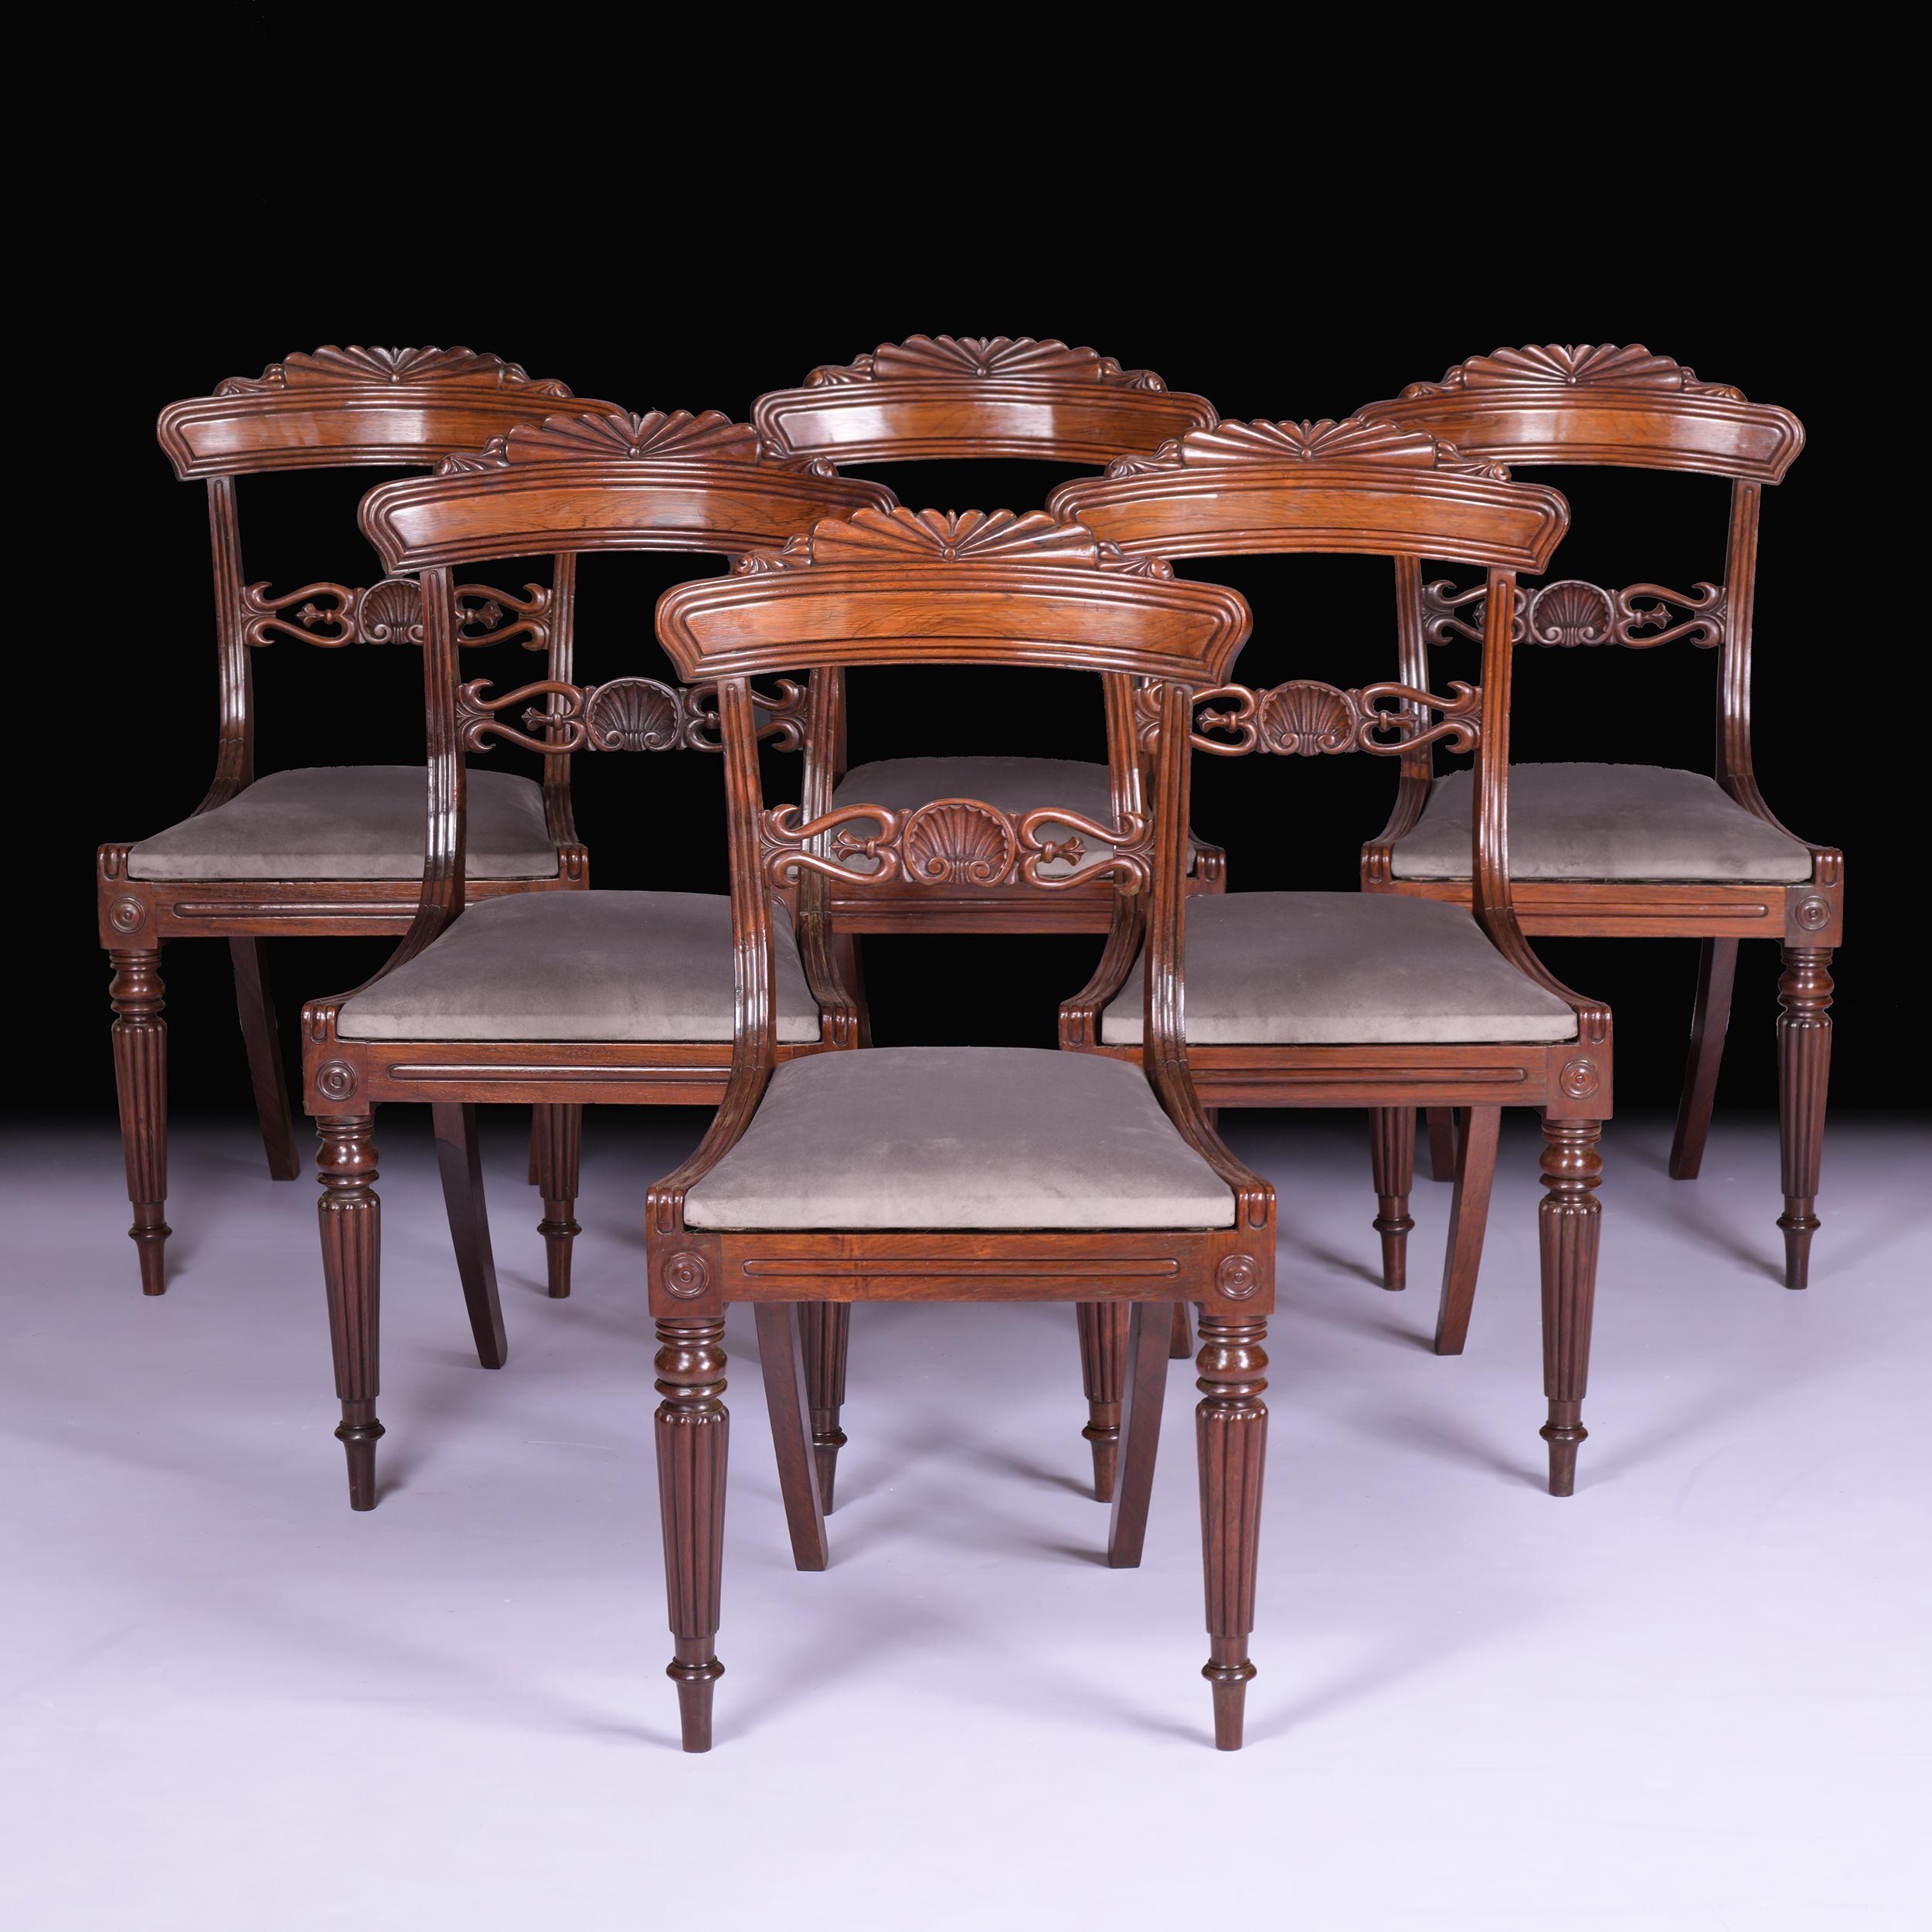 A very fine set of 6 Regency dining chairs attributed to Gillows of Lancaster and London, having a quality figured top rail with a reeded edge and carved top supported by shaped reeded supports over foliate scrolled splats, drop-in seats with luxury